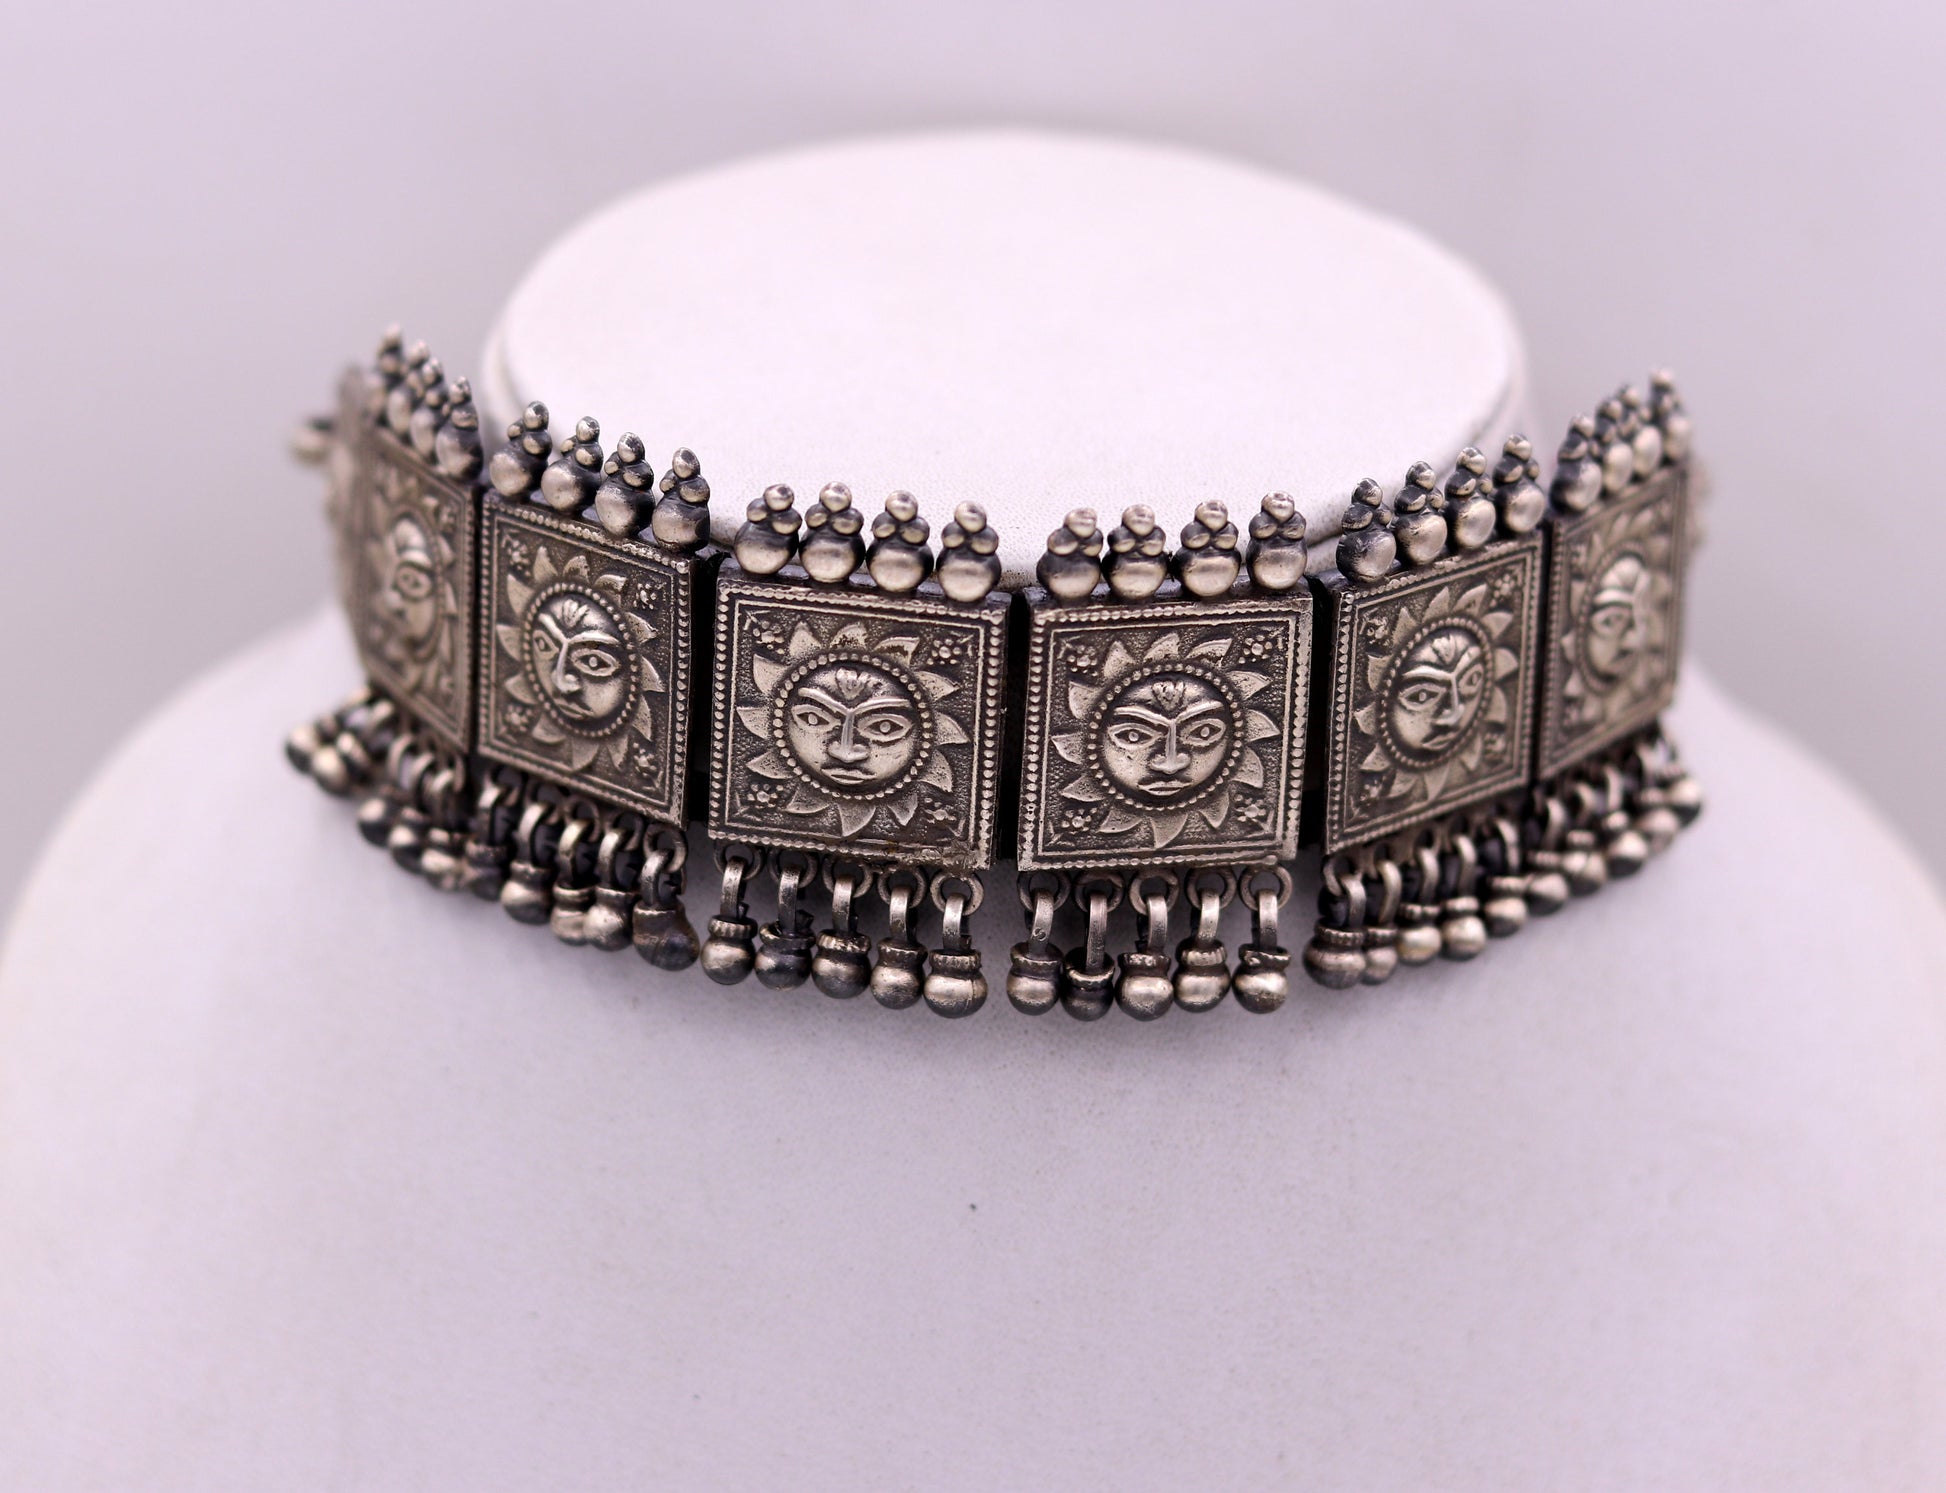 Vintage antique design handmade 925 sterling silver fabulous sum face design necklace choker with attractive hangings tribal jewelry set78 - TRIBAL ORNAMENTS